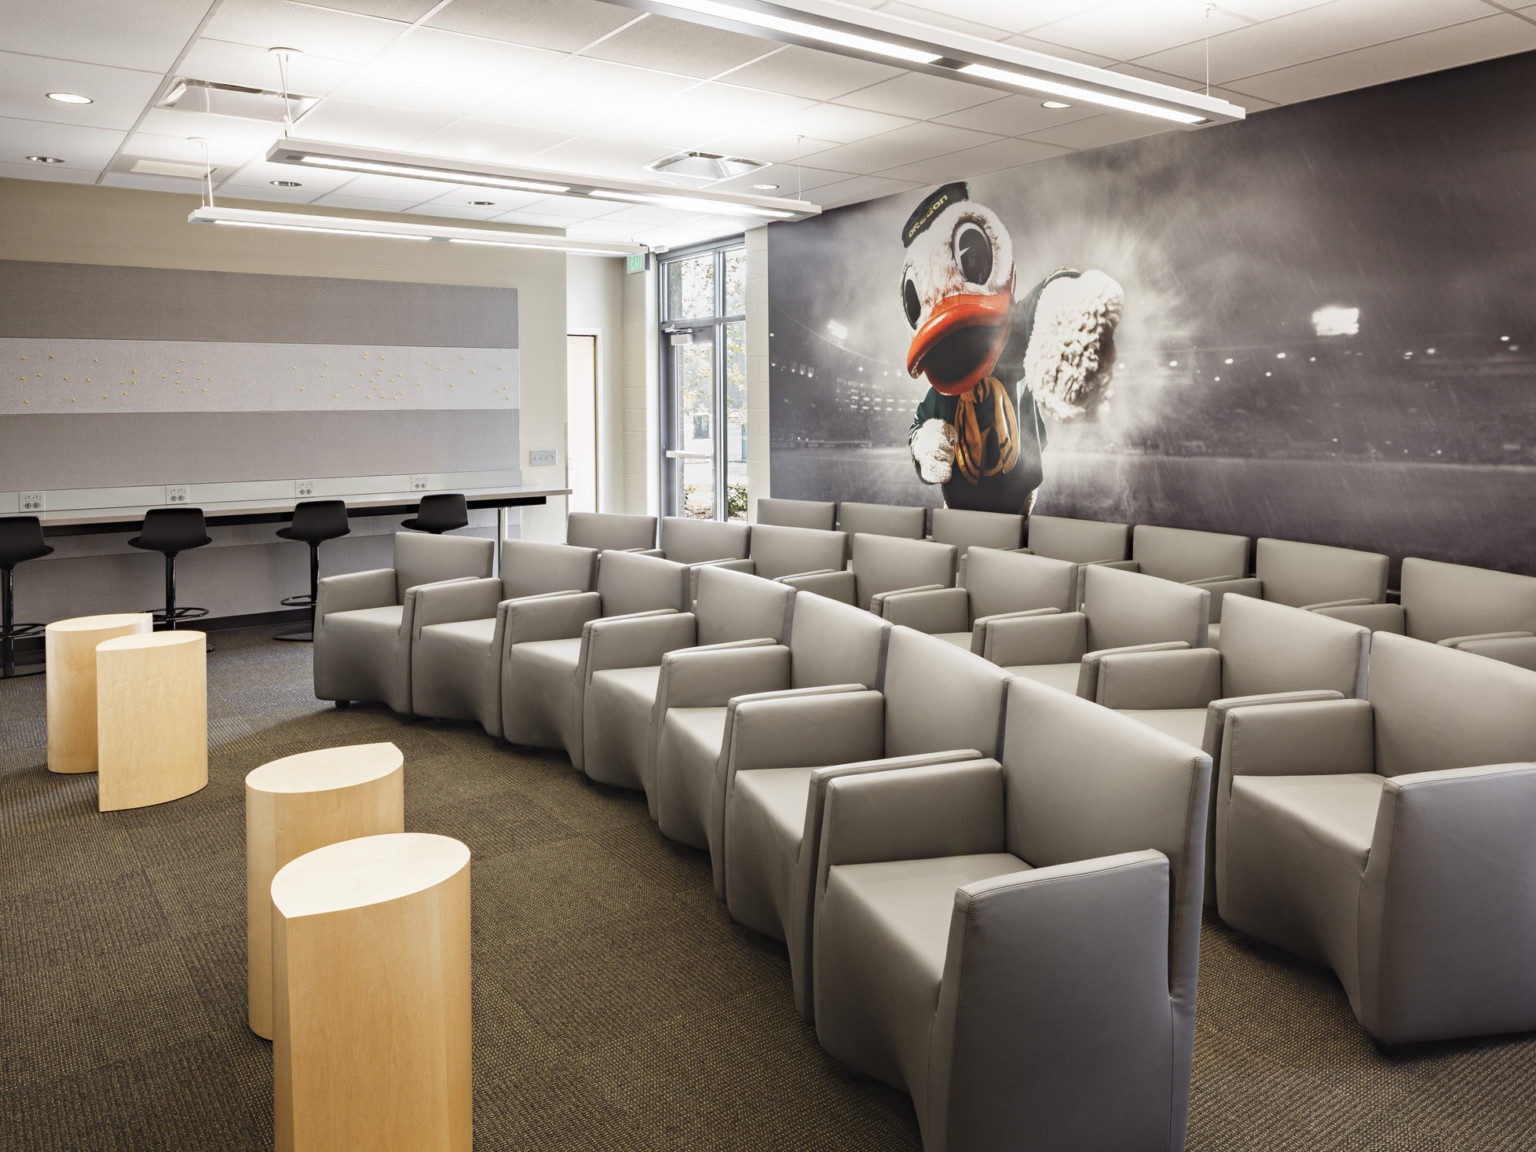 Oregon Duck mascot photo mural on wall behind rows of grey armchairs facing small wood tables. Work counter at far wall